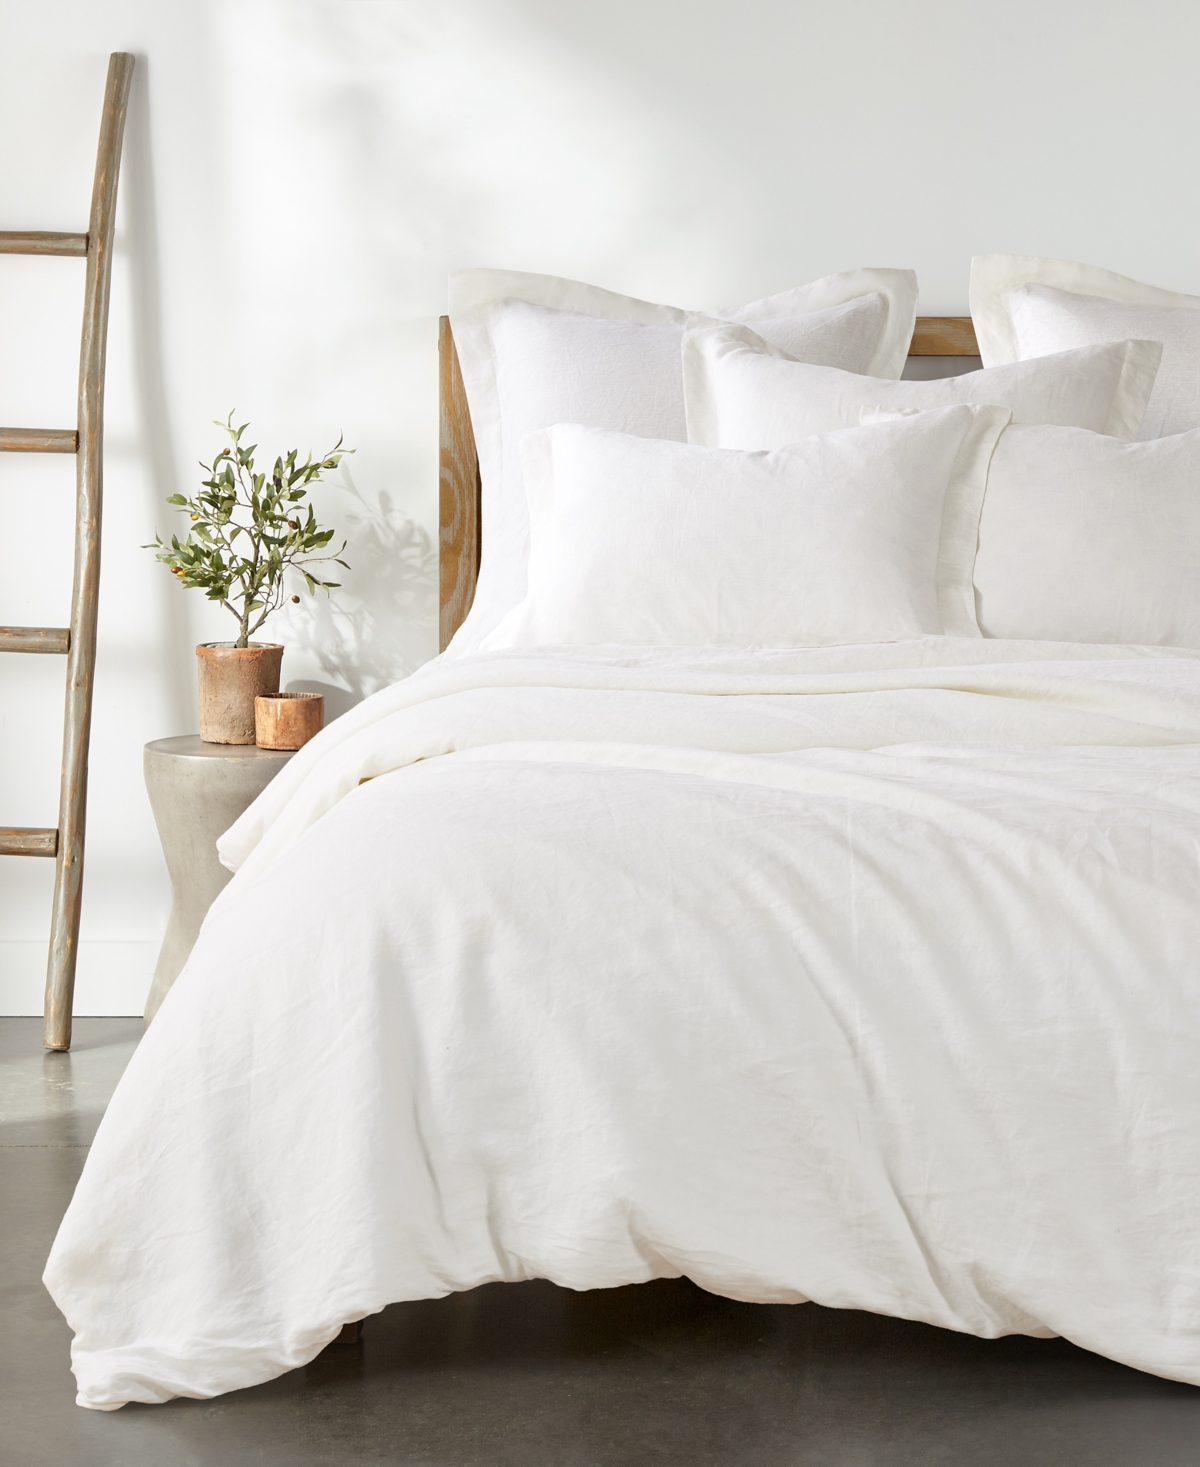 Levtex Washed Linen Solid Duvet Cover, King/california King In Neutral